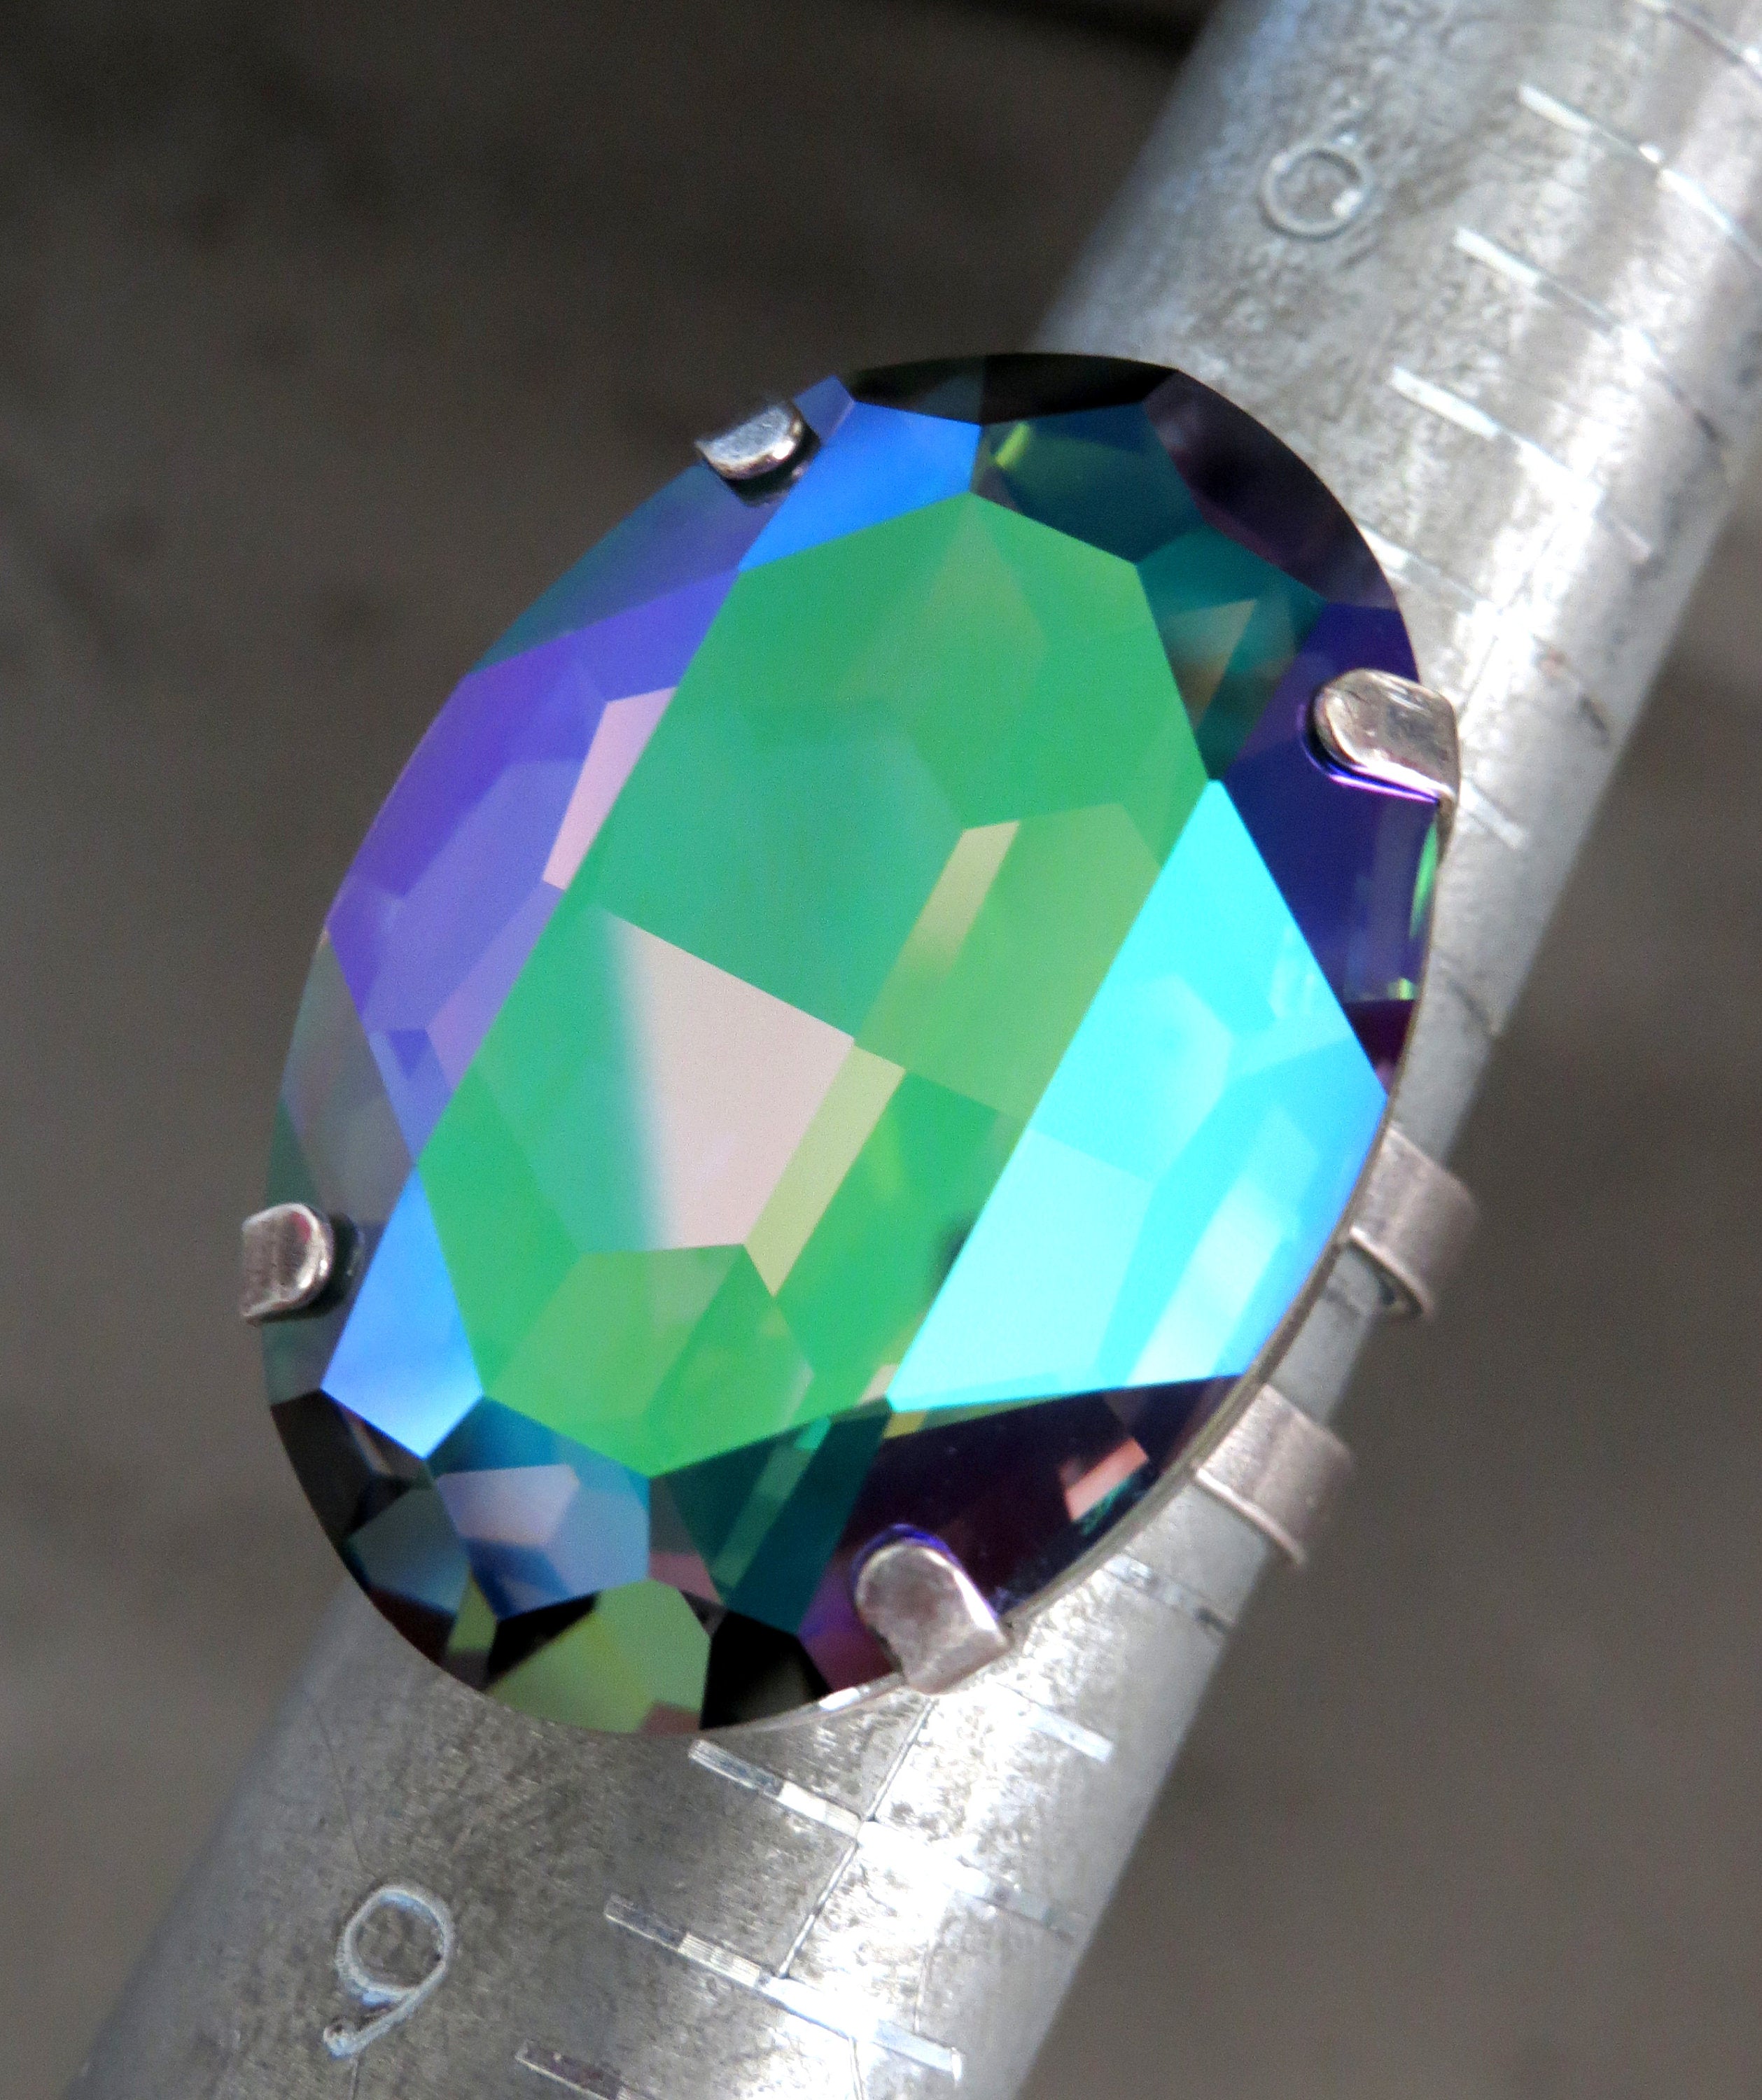 WICKED WITCH - Large Oval Cocktail Ring with Swarovski Crystal in Shimmer Green, Purple, Aqua - Halloween Party Jewelry, Bad Witch Costume